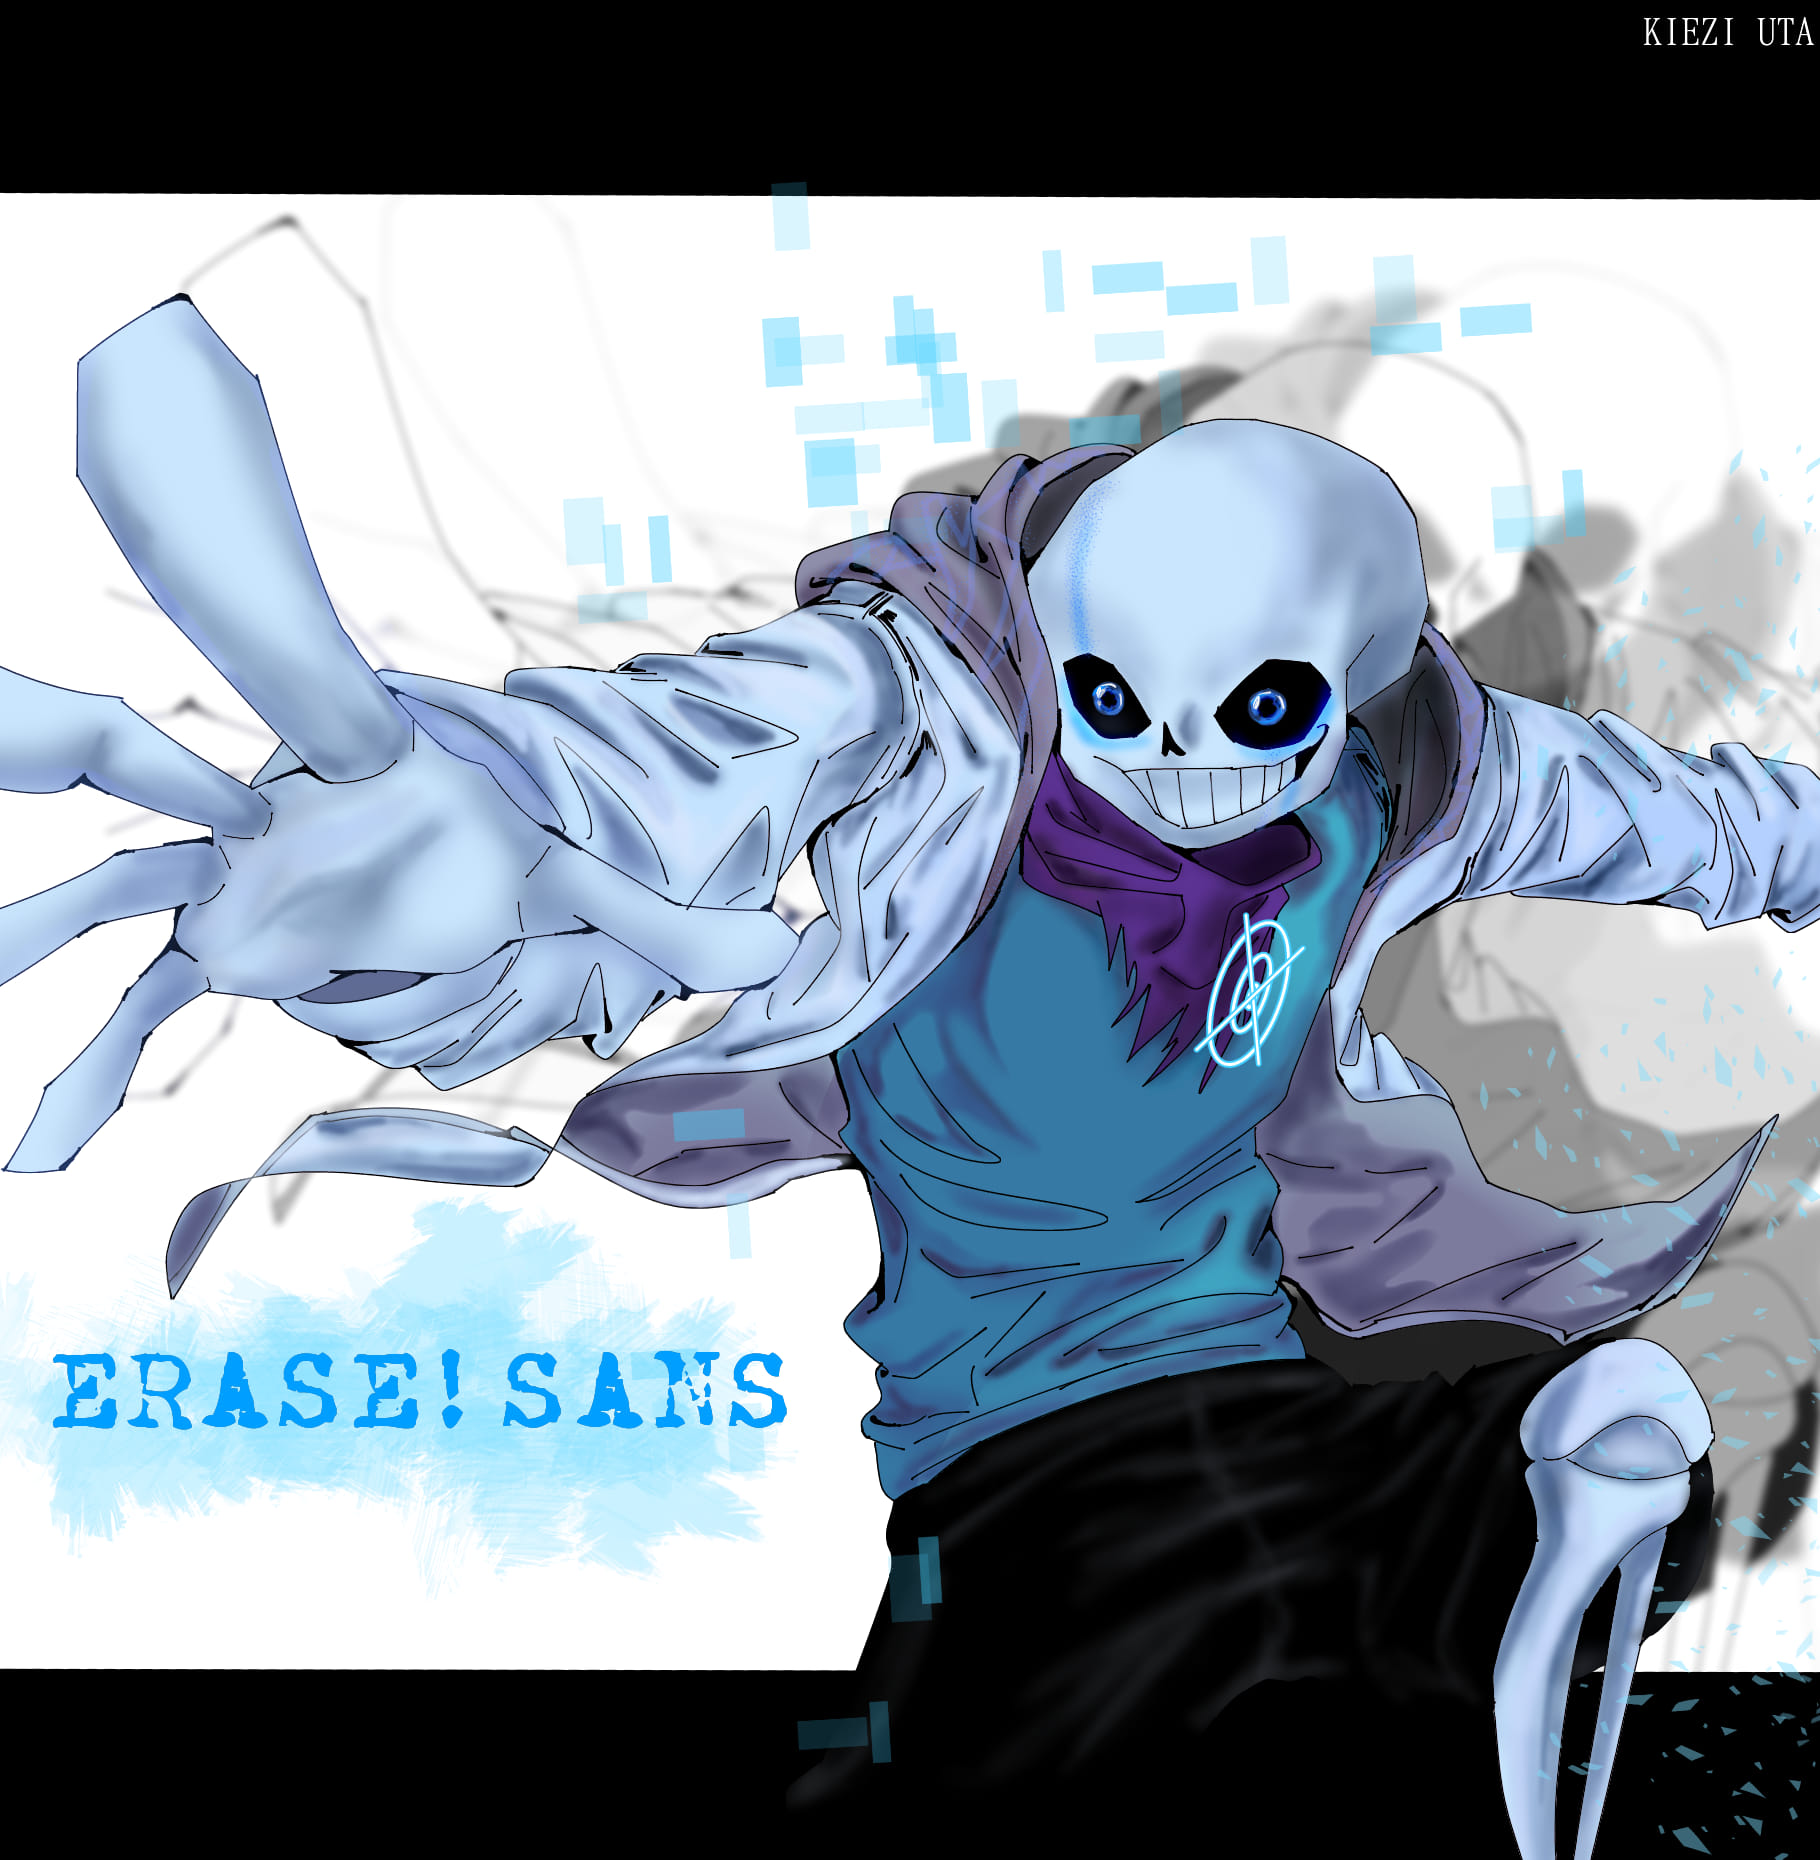 Who is Killer Sans (Teach Tale Undertale animation and Game Design) 